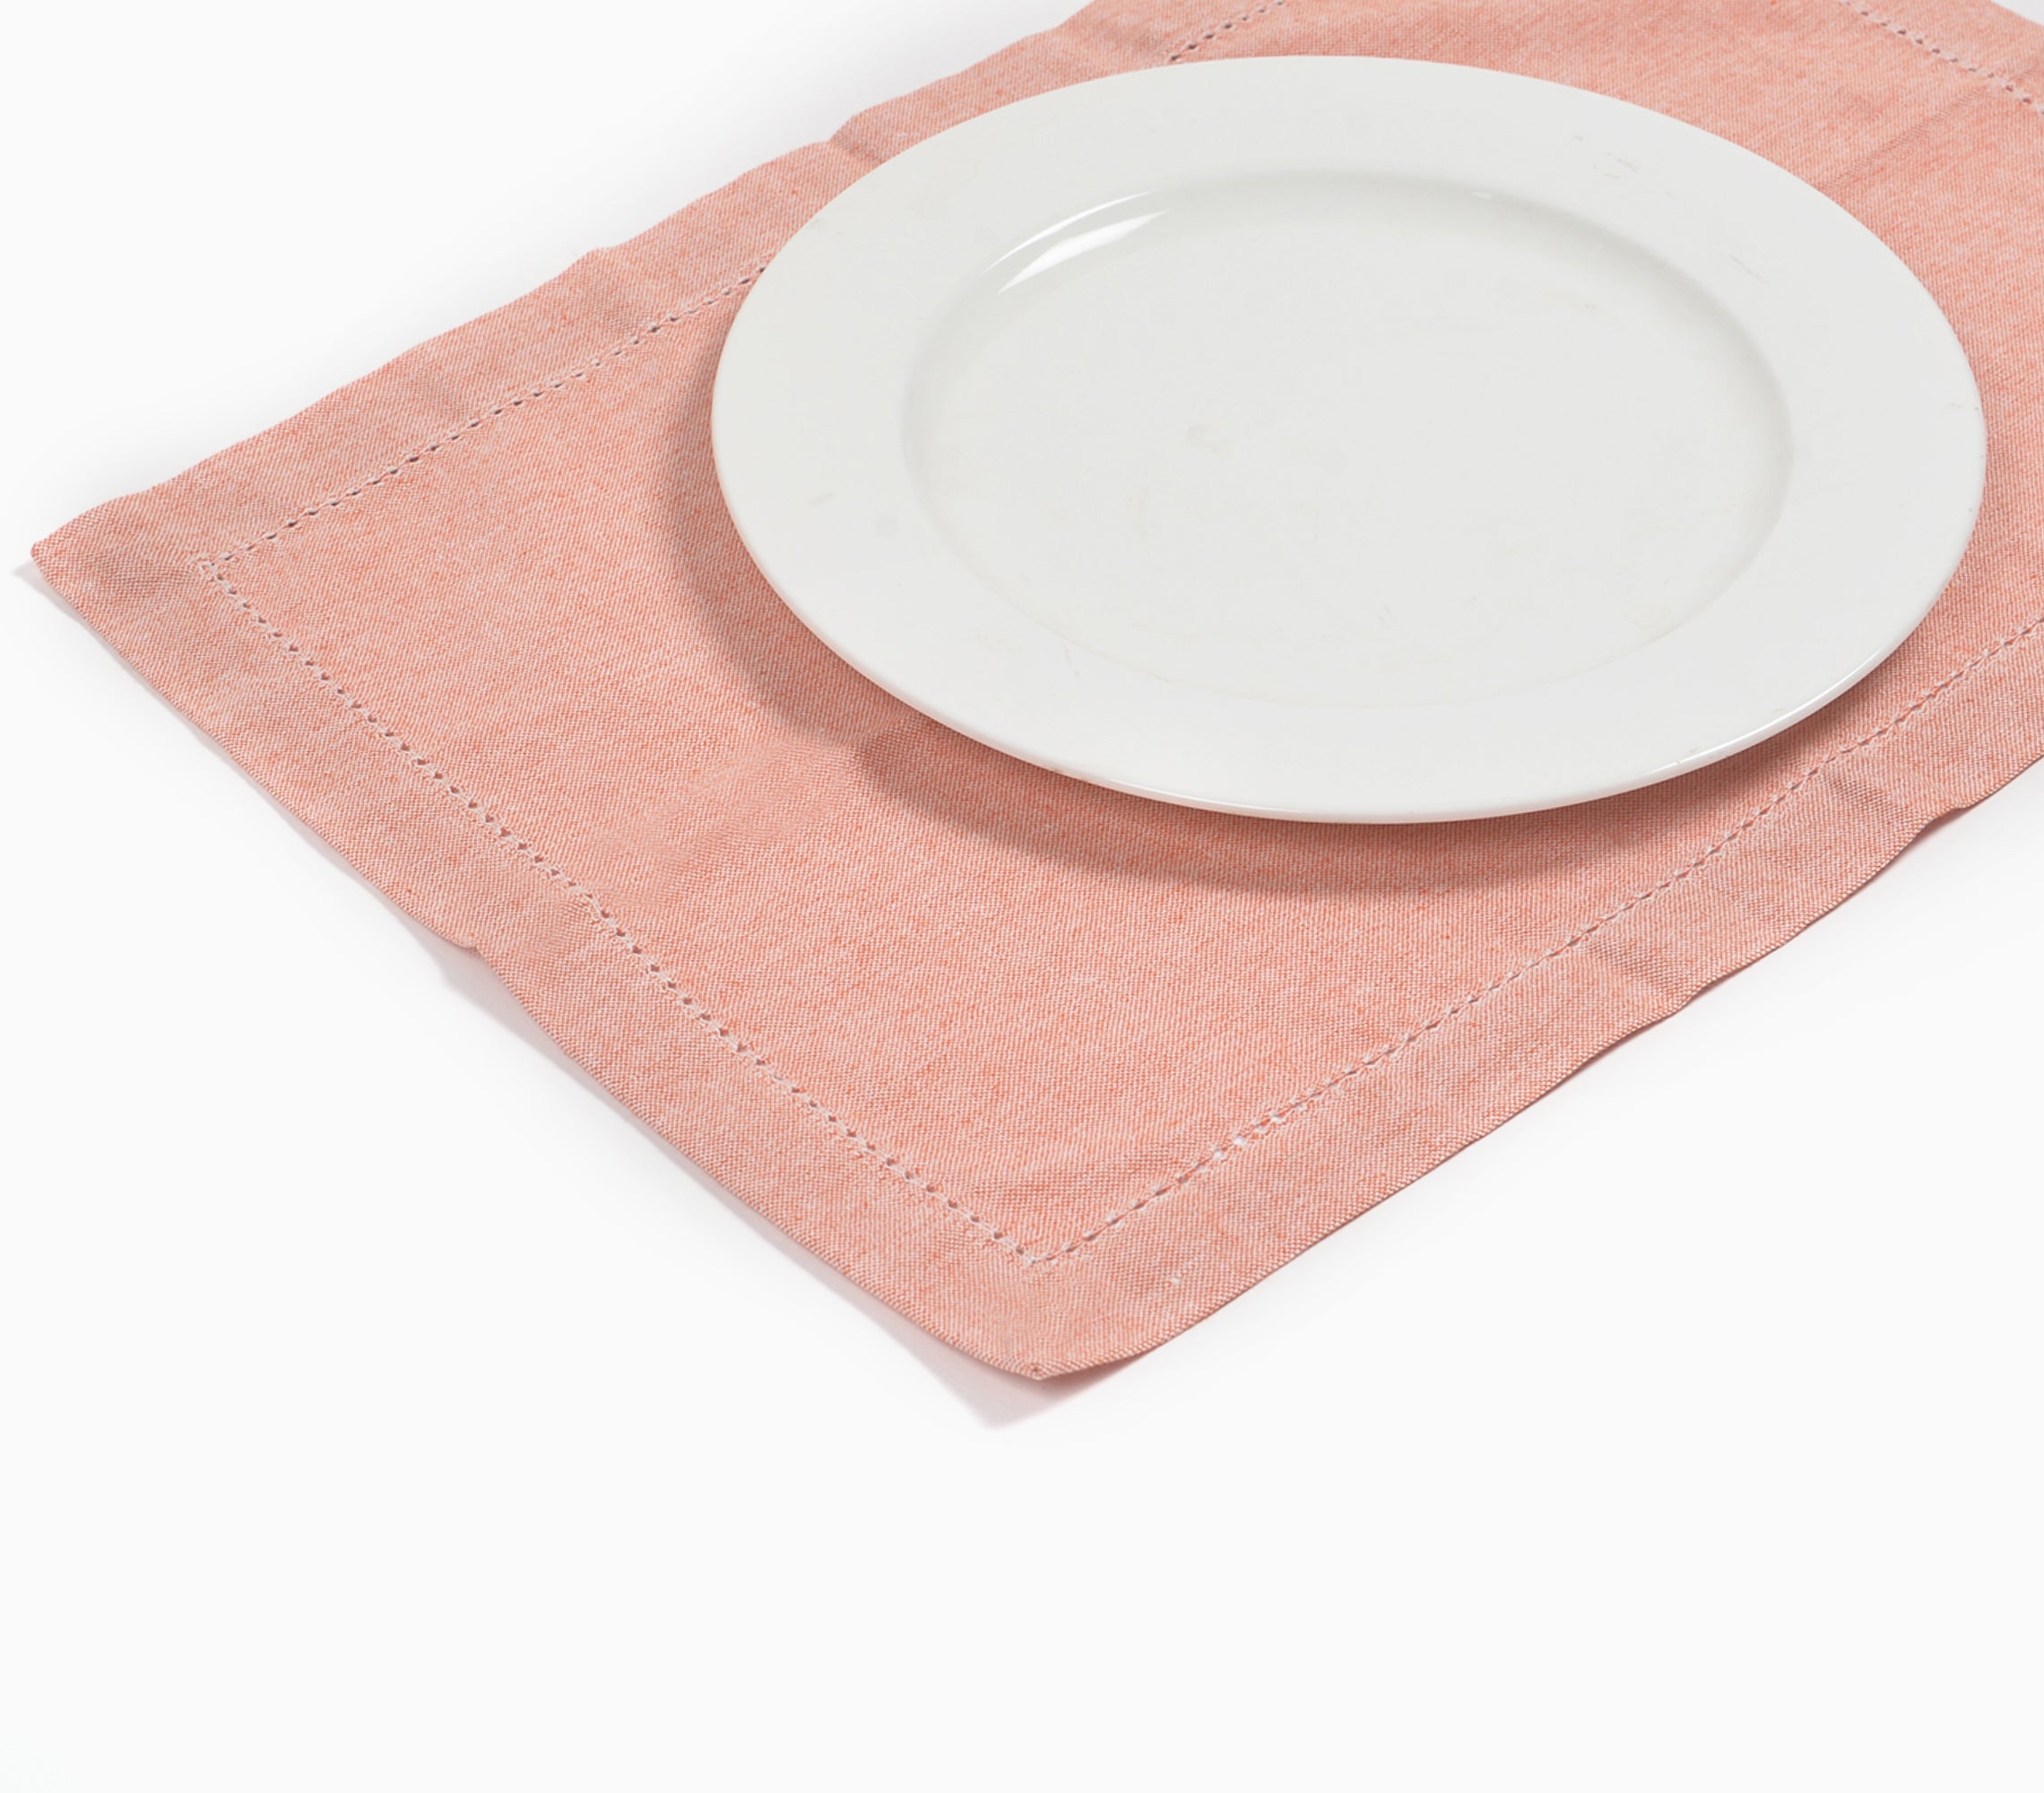 Solid Chambray Weave Placemats With Hem Stitch (set of 4)- 2 SETS